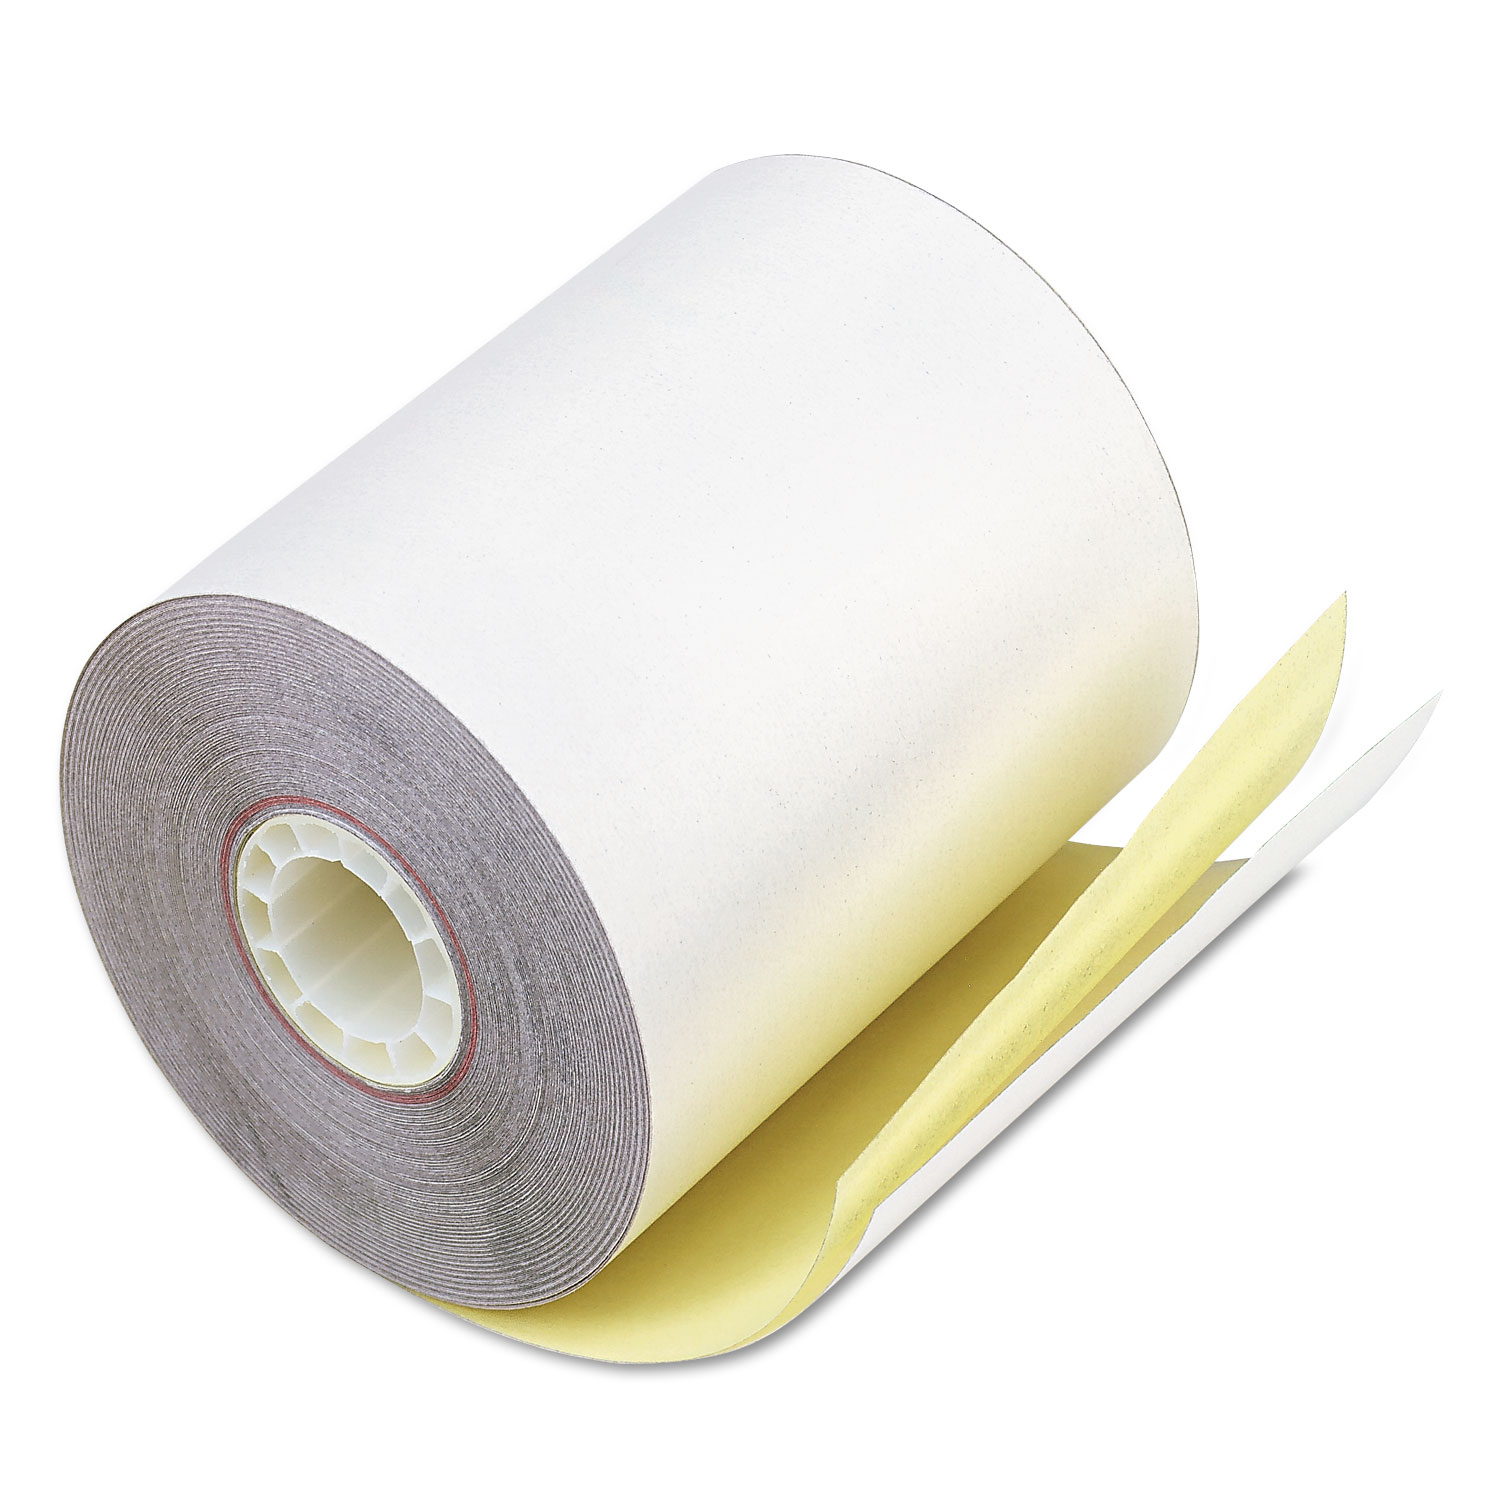  Iconex 7685 Impact Printing Carbonless Paper Rolls, 0.69 Core, 3.25 x 80 ft, White/Canary, 60/Carton (ICX90770452) 